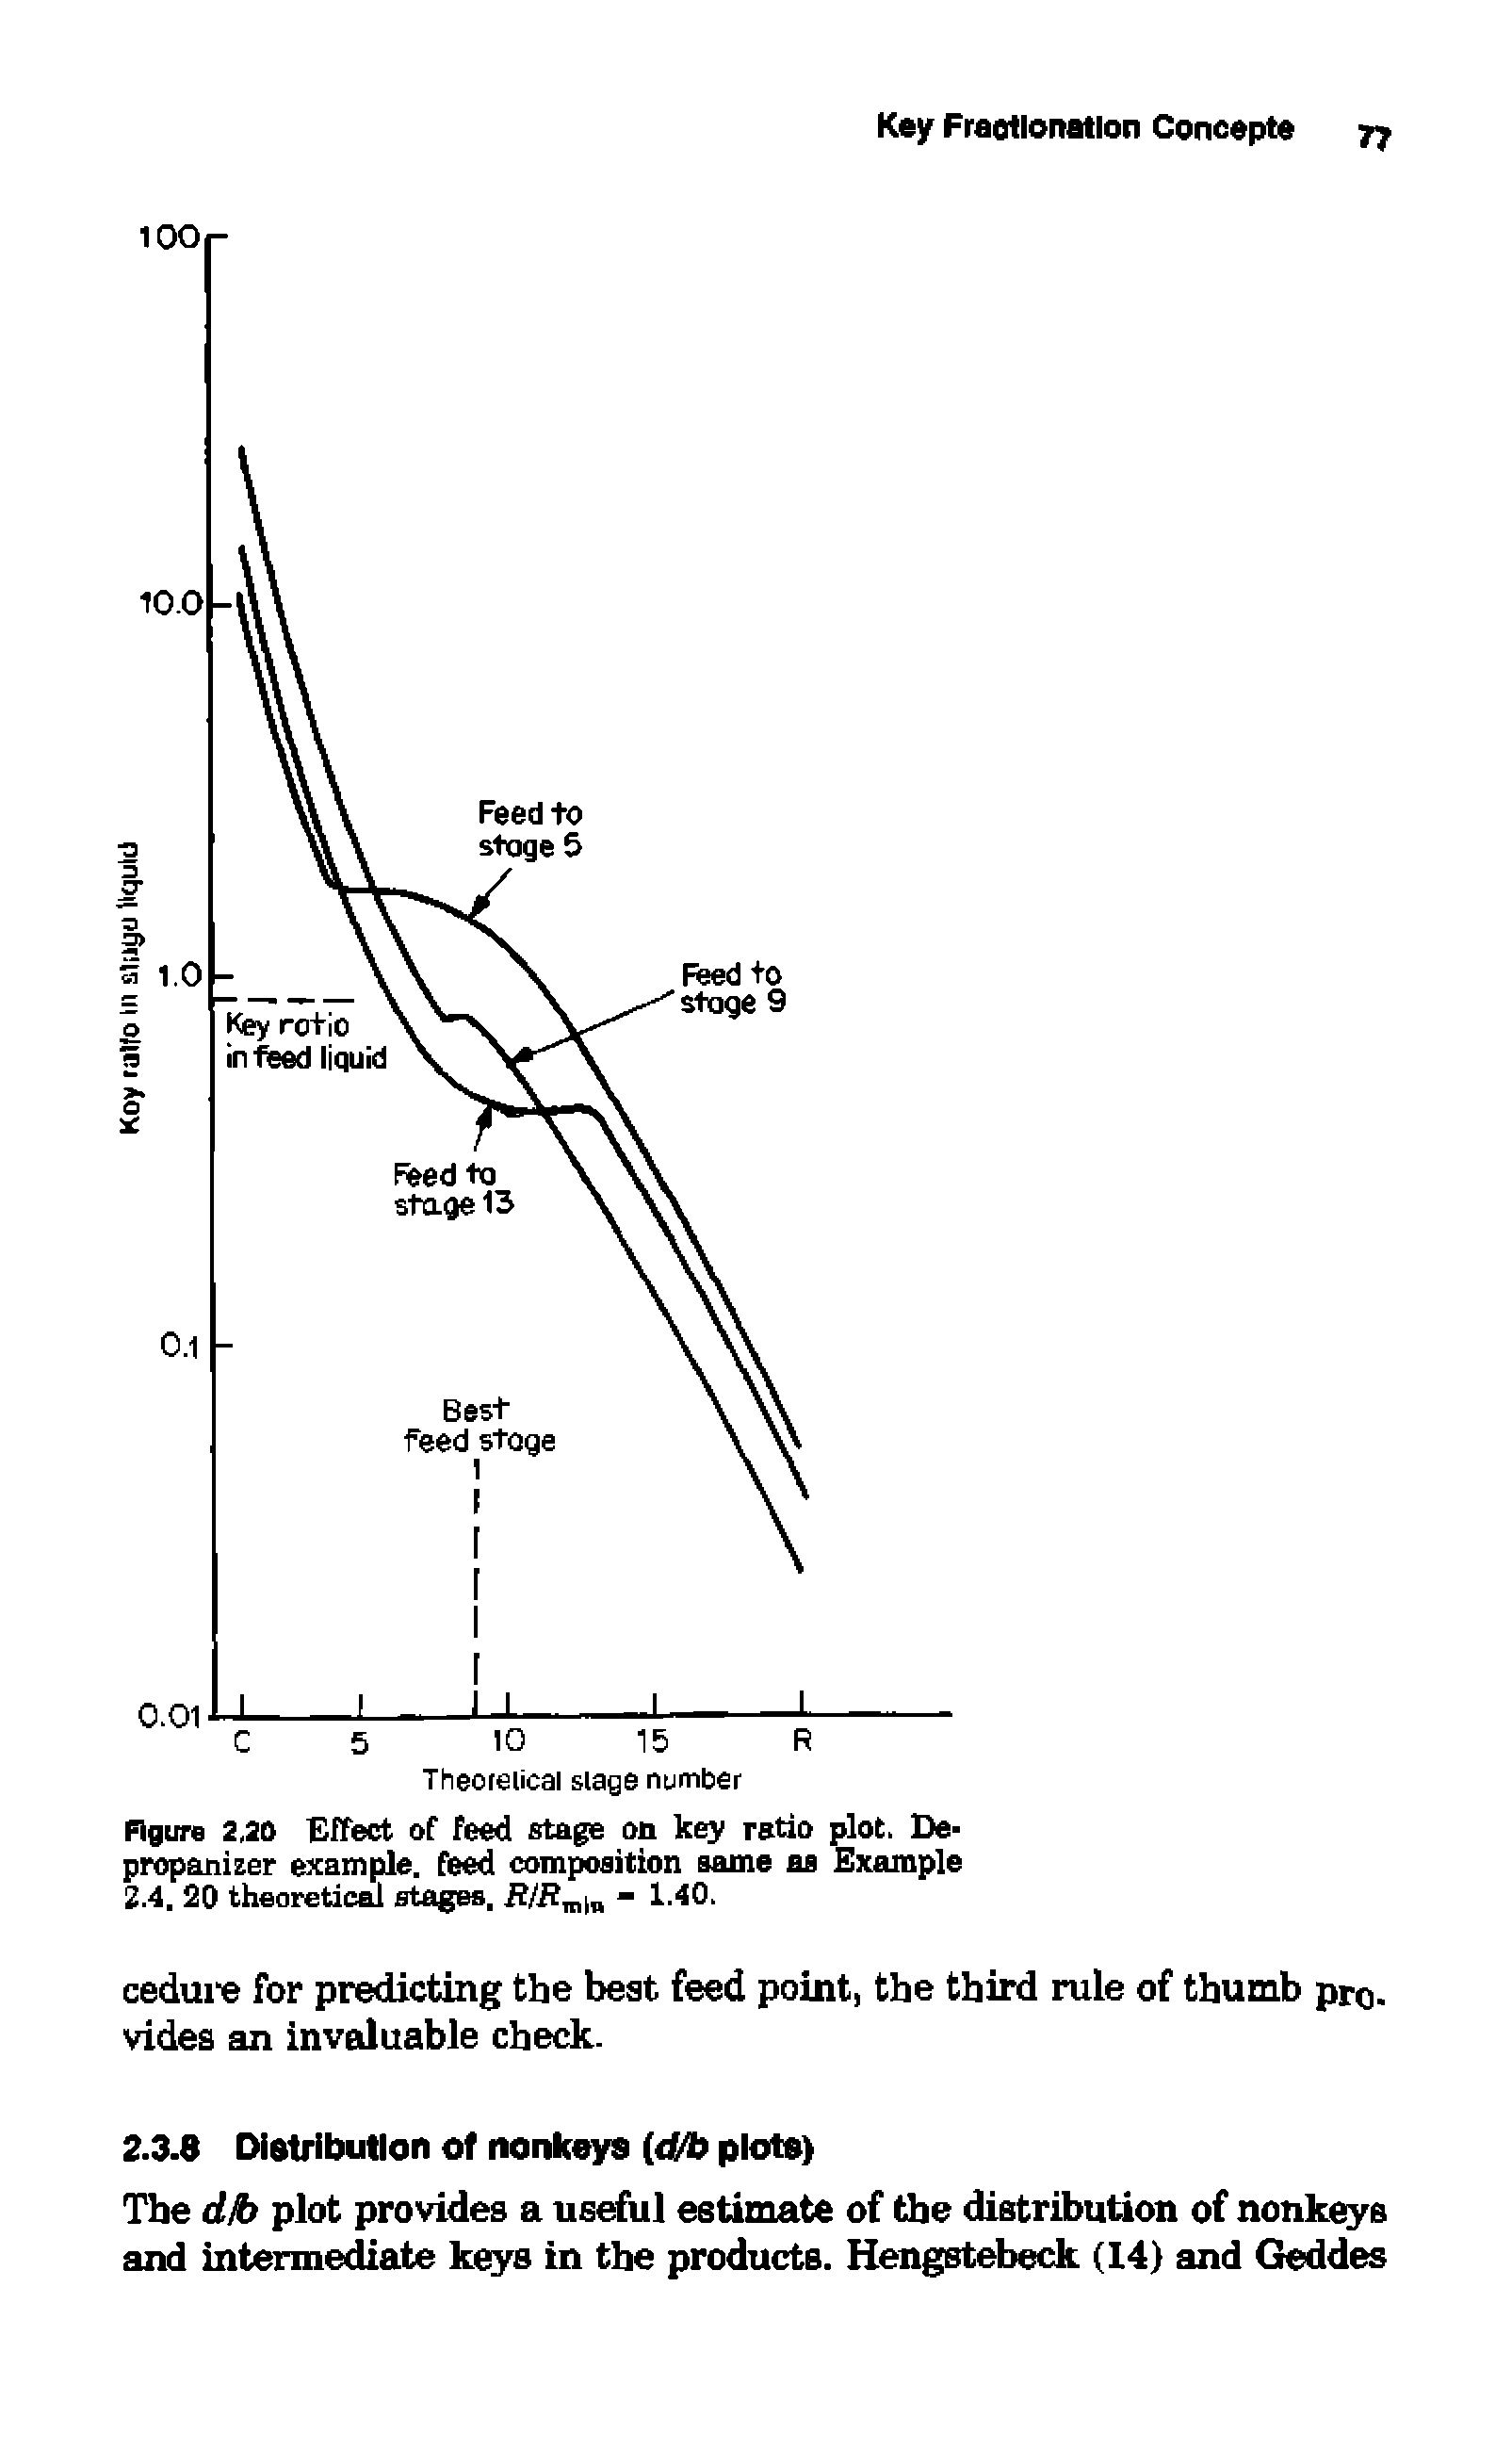 Figure 2,20 Effect of feed stage on key ratio plot. Depropanizer example, feed composition same as Example 2.4. 20 theoretical stages, R/Rmin - 1.40.